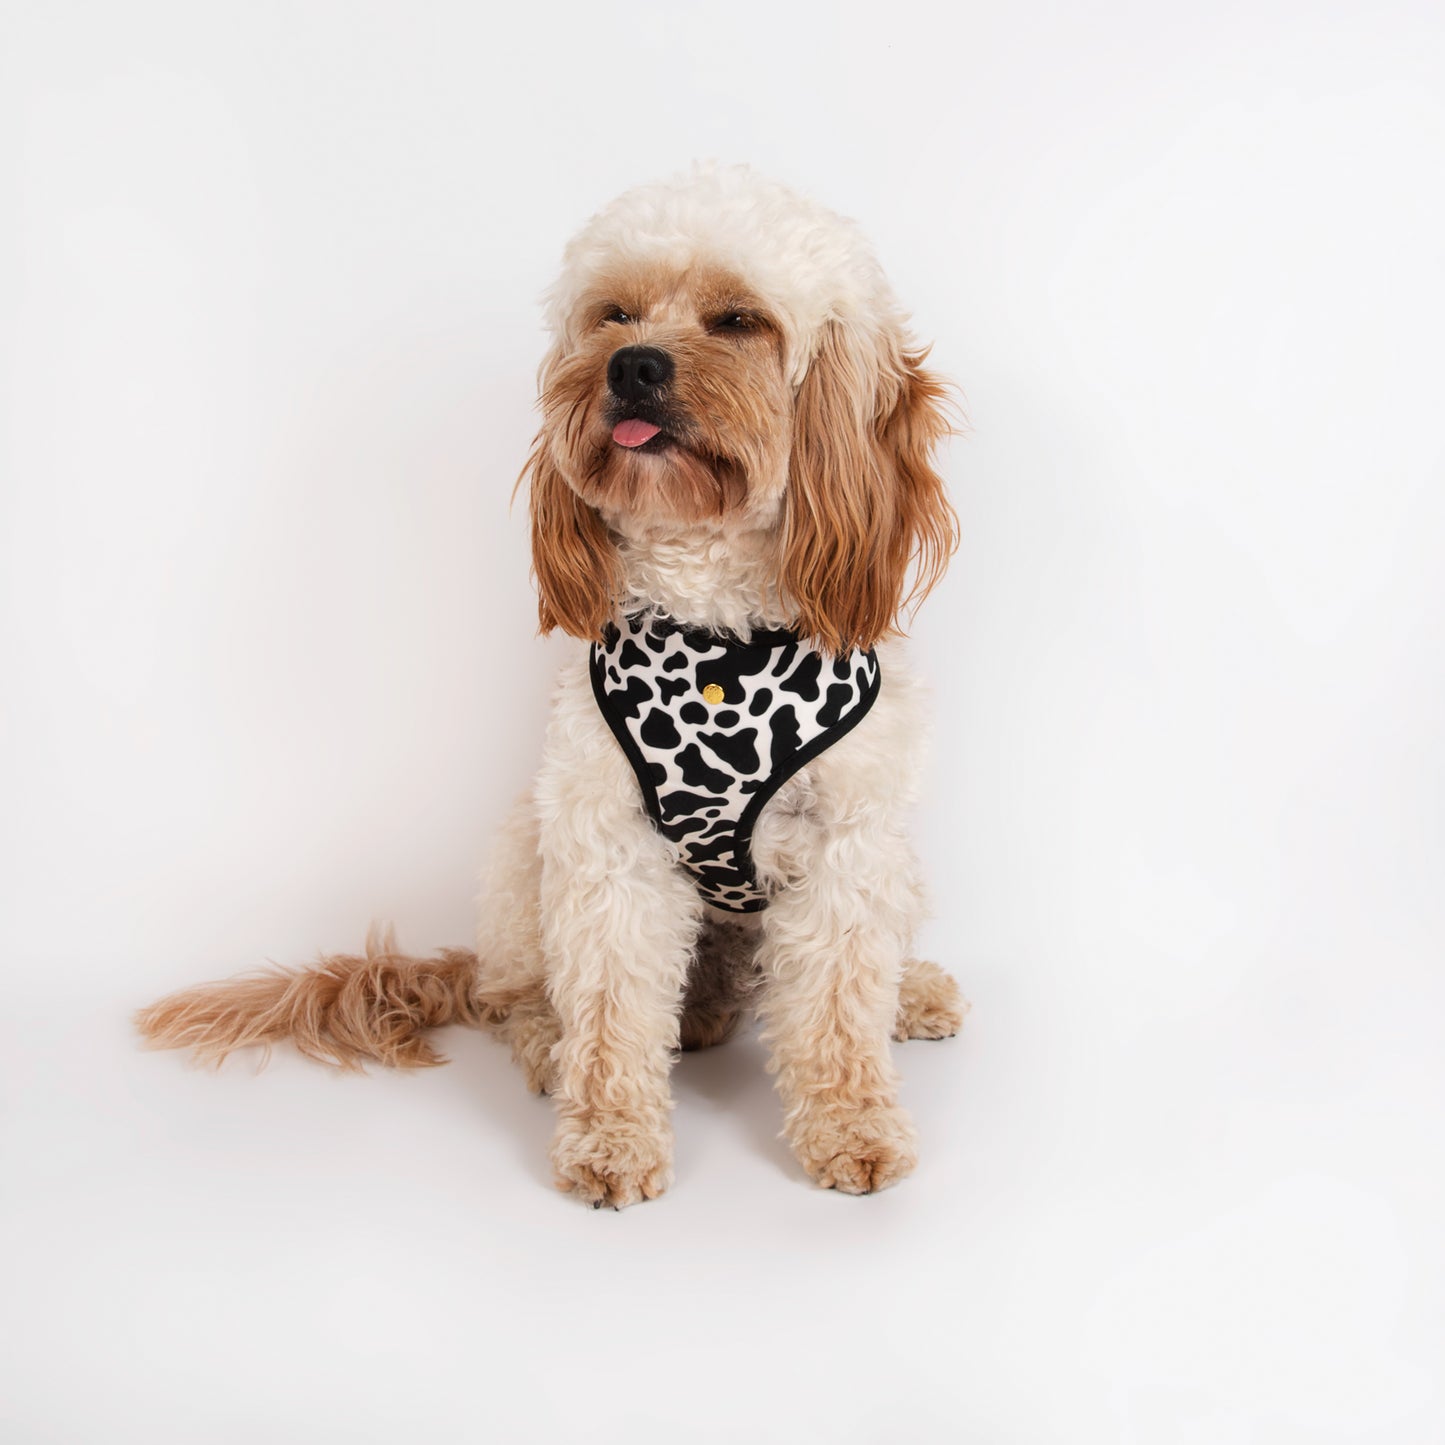 Pata Paw moo harness as seen in a medium-sized dog.